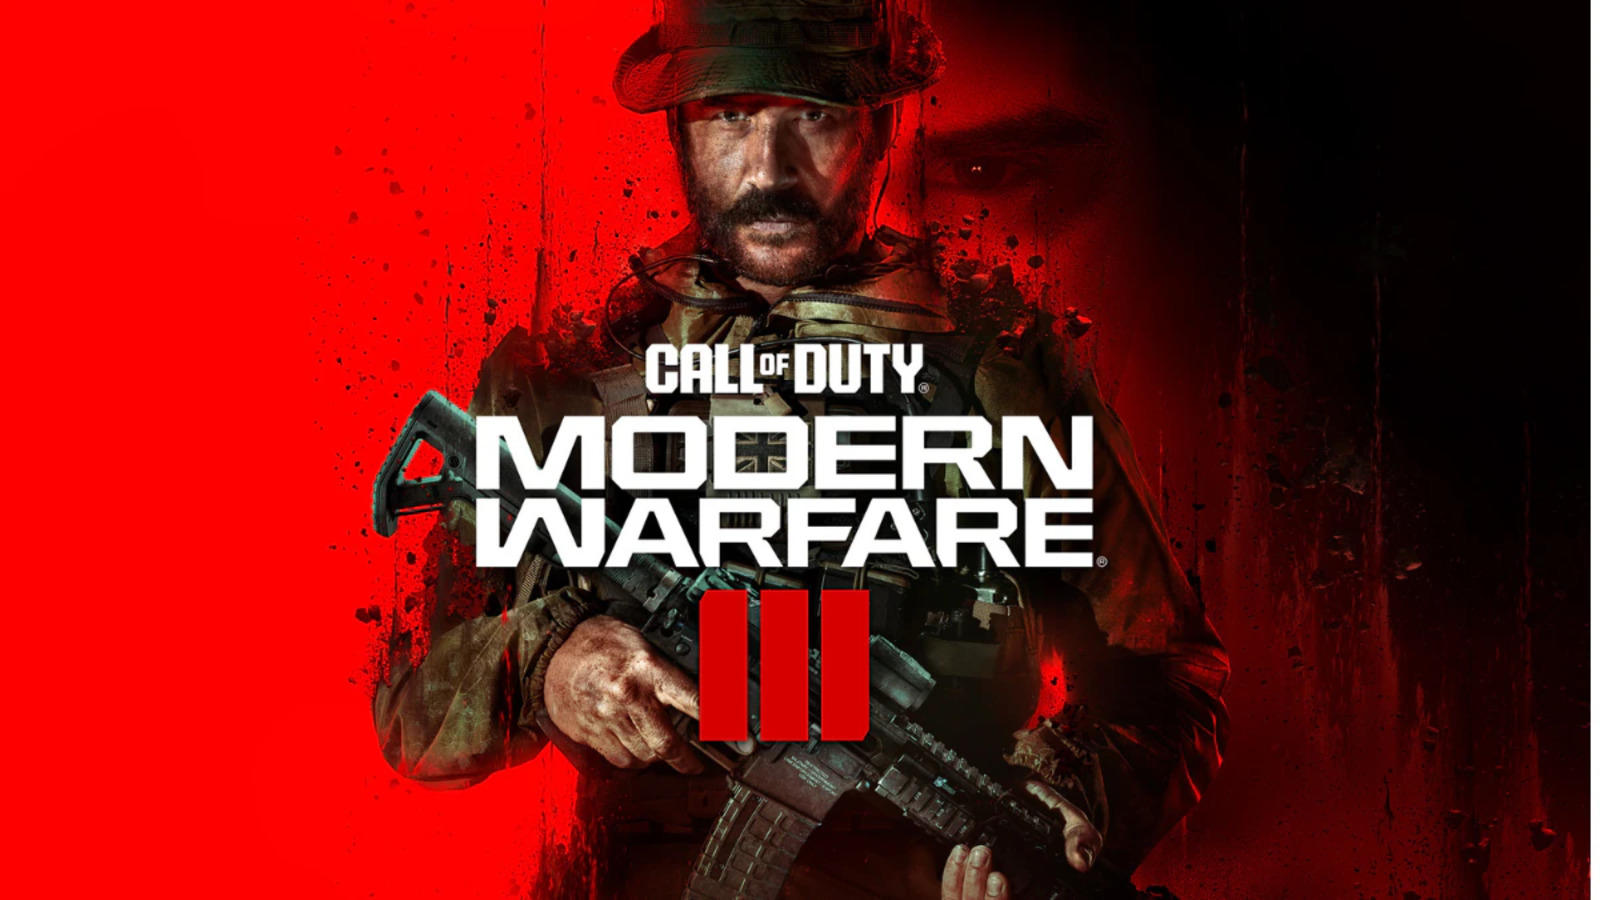 Call of Duty Modern Warfare 2 Beta: Start date and how to get access